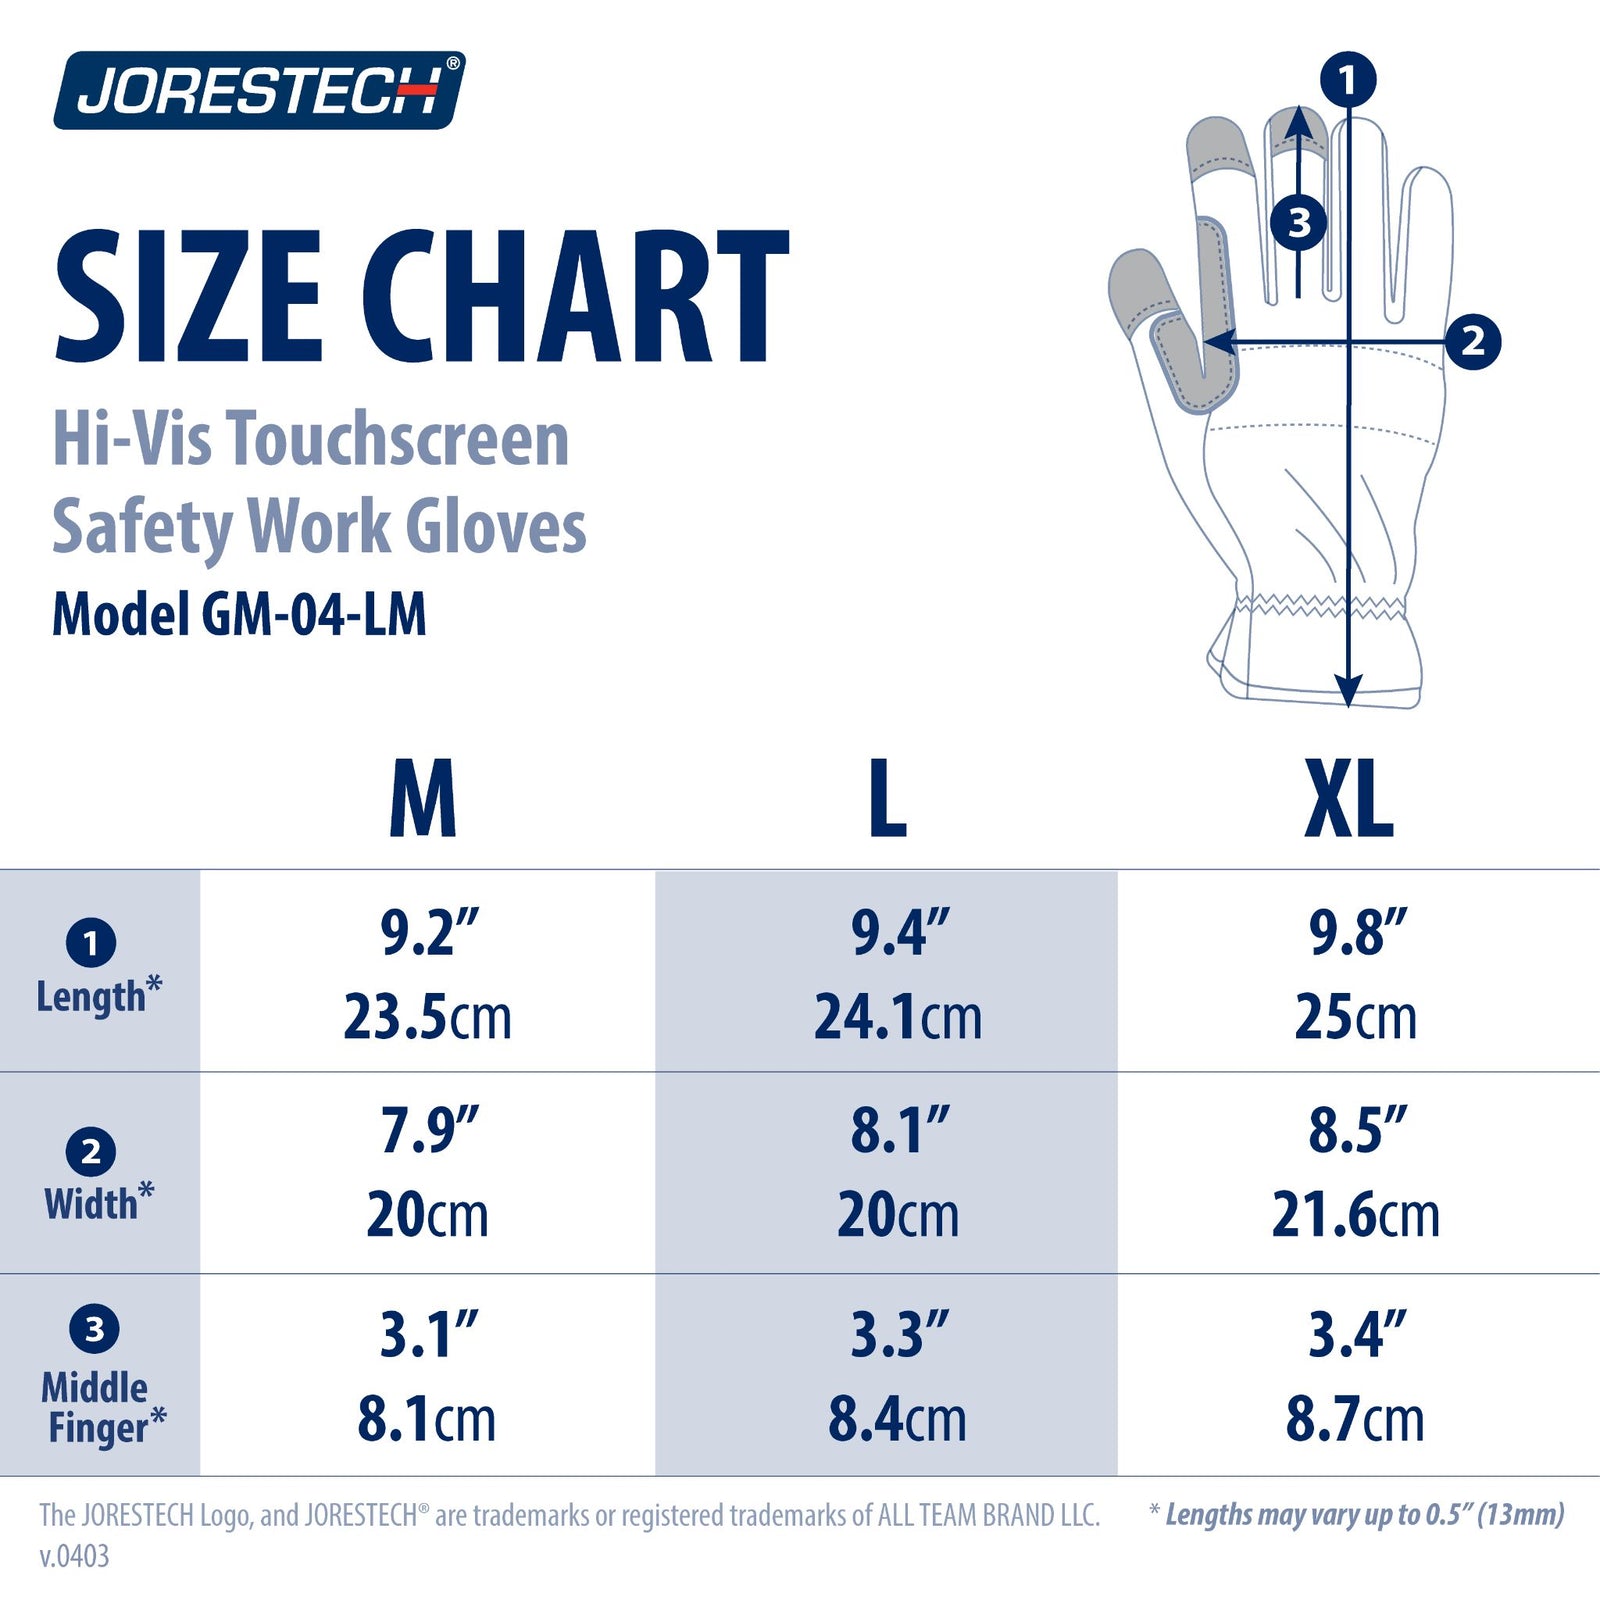 Size chart of the hi visibility touchscreen safety work gloves